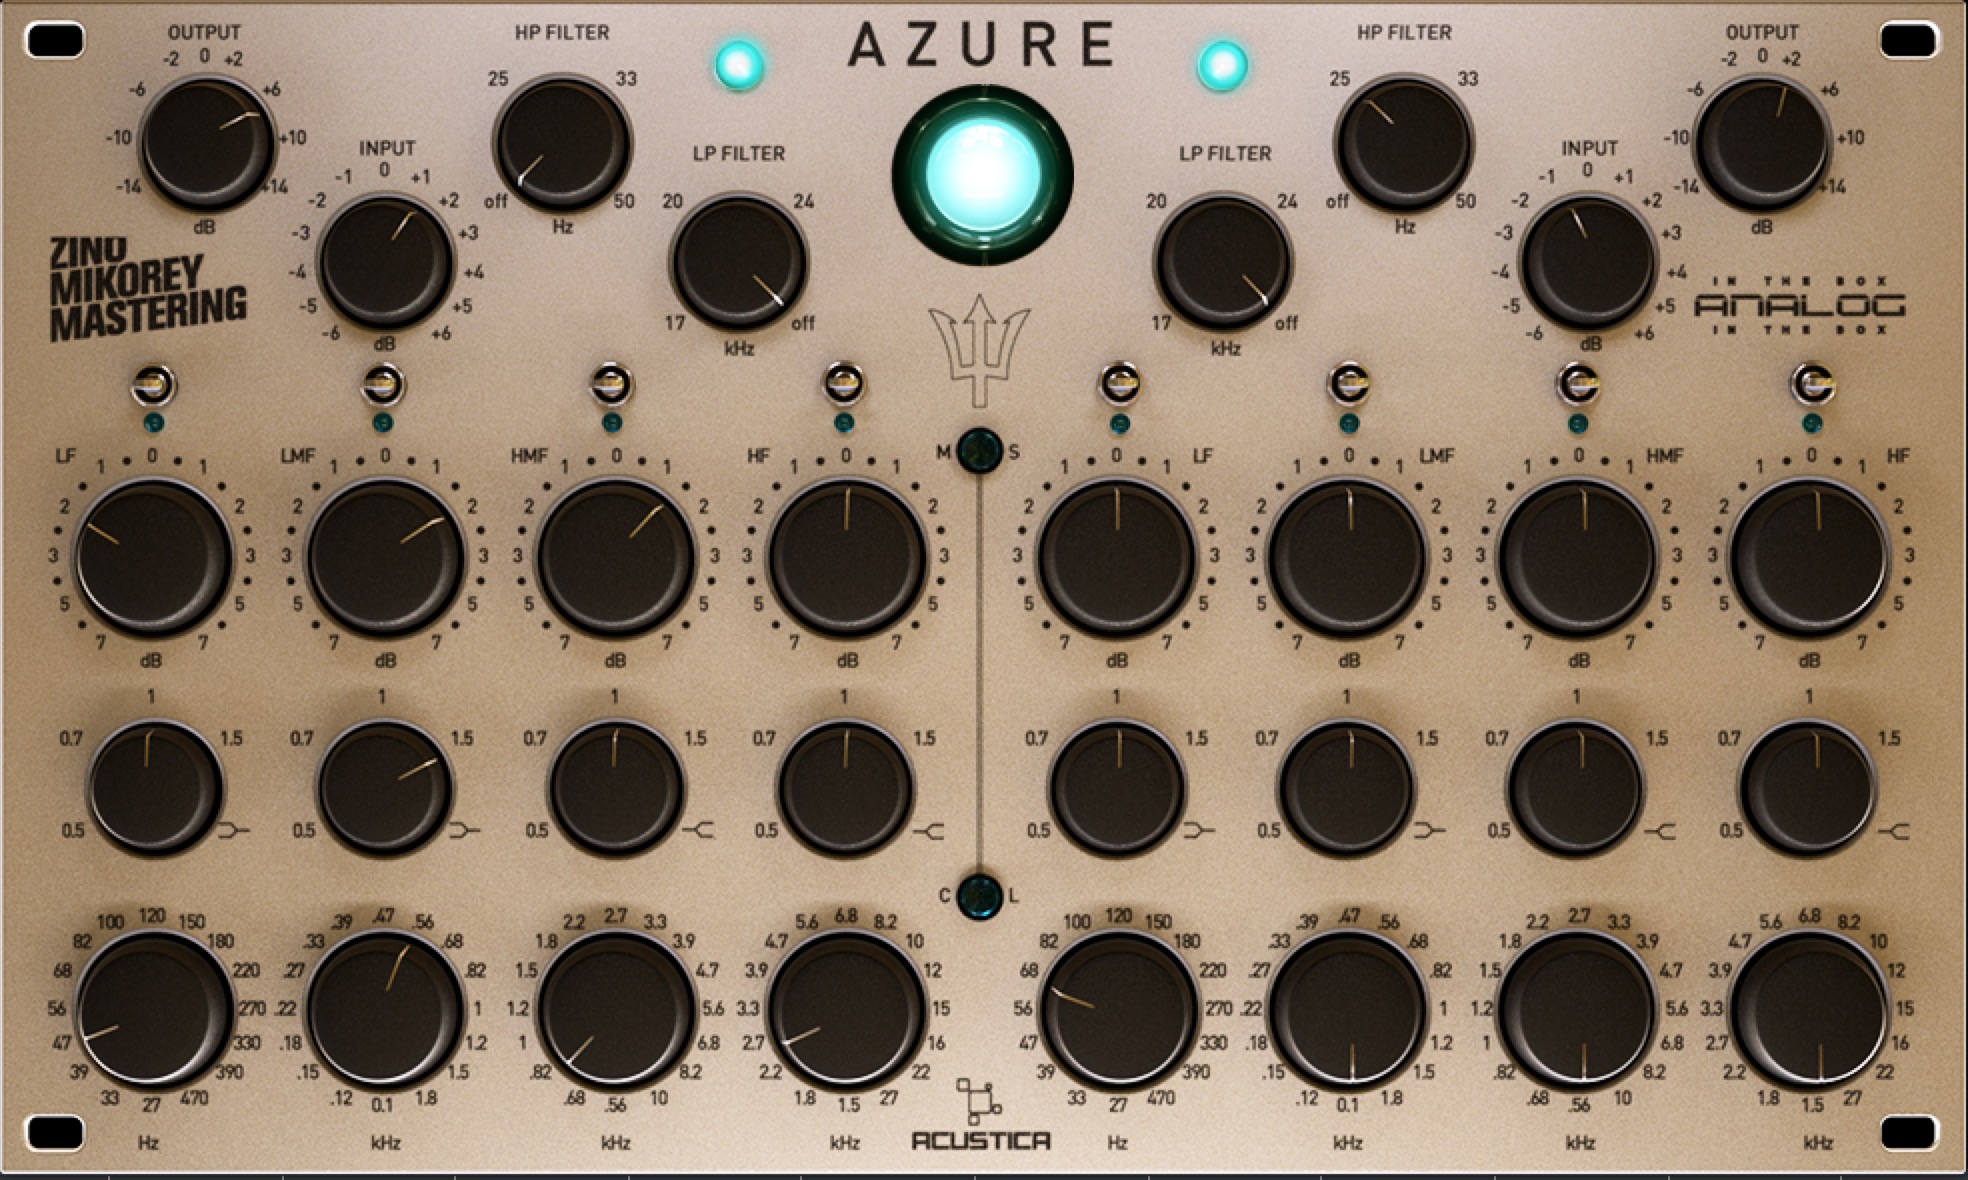 AZURE  a “zero-compromise mastering solution” by Acustica Audio available for PRE-ORDER